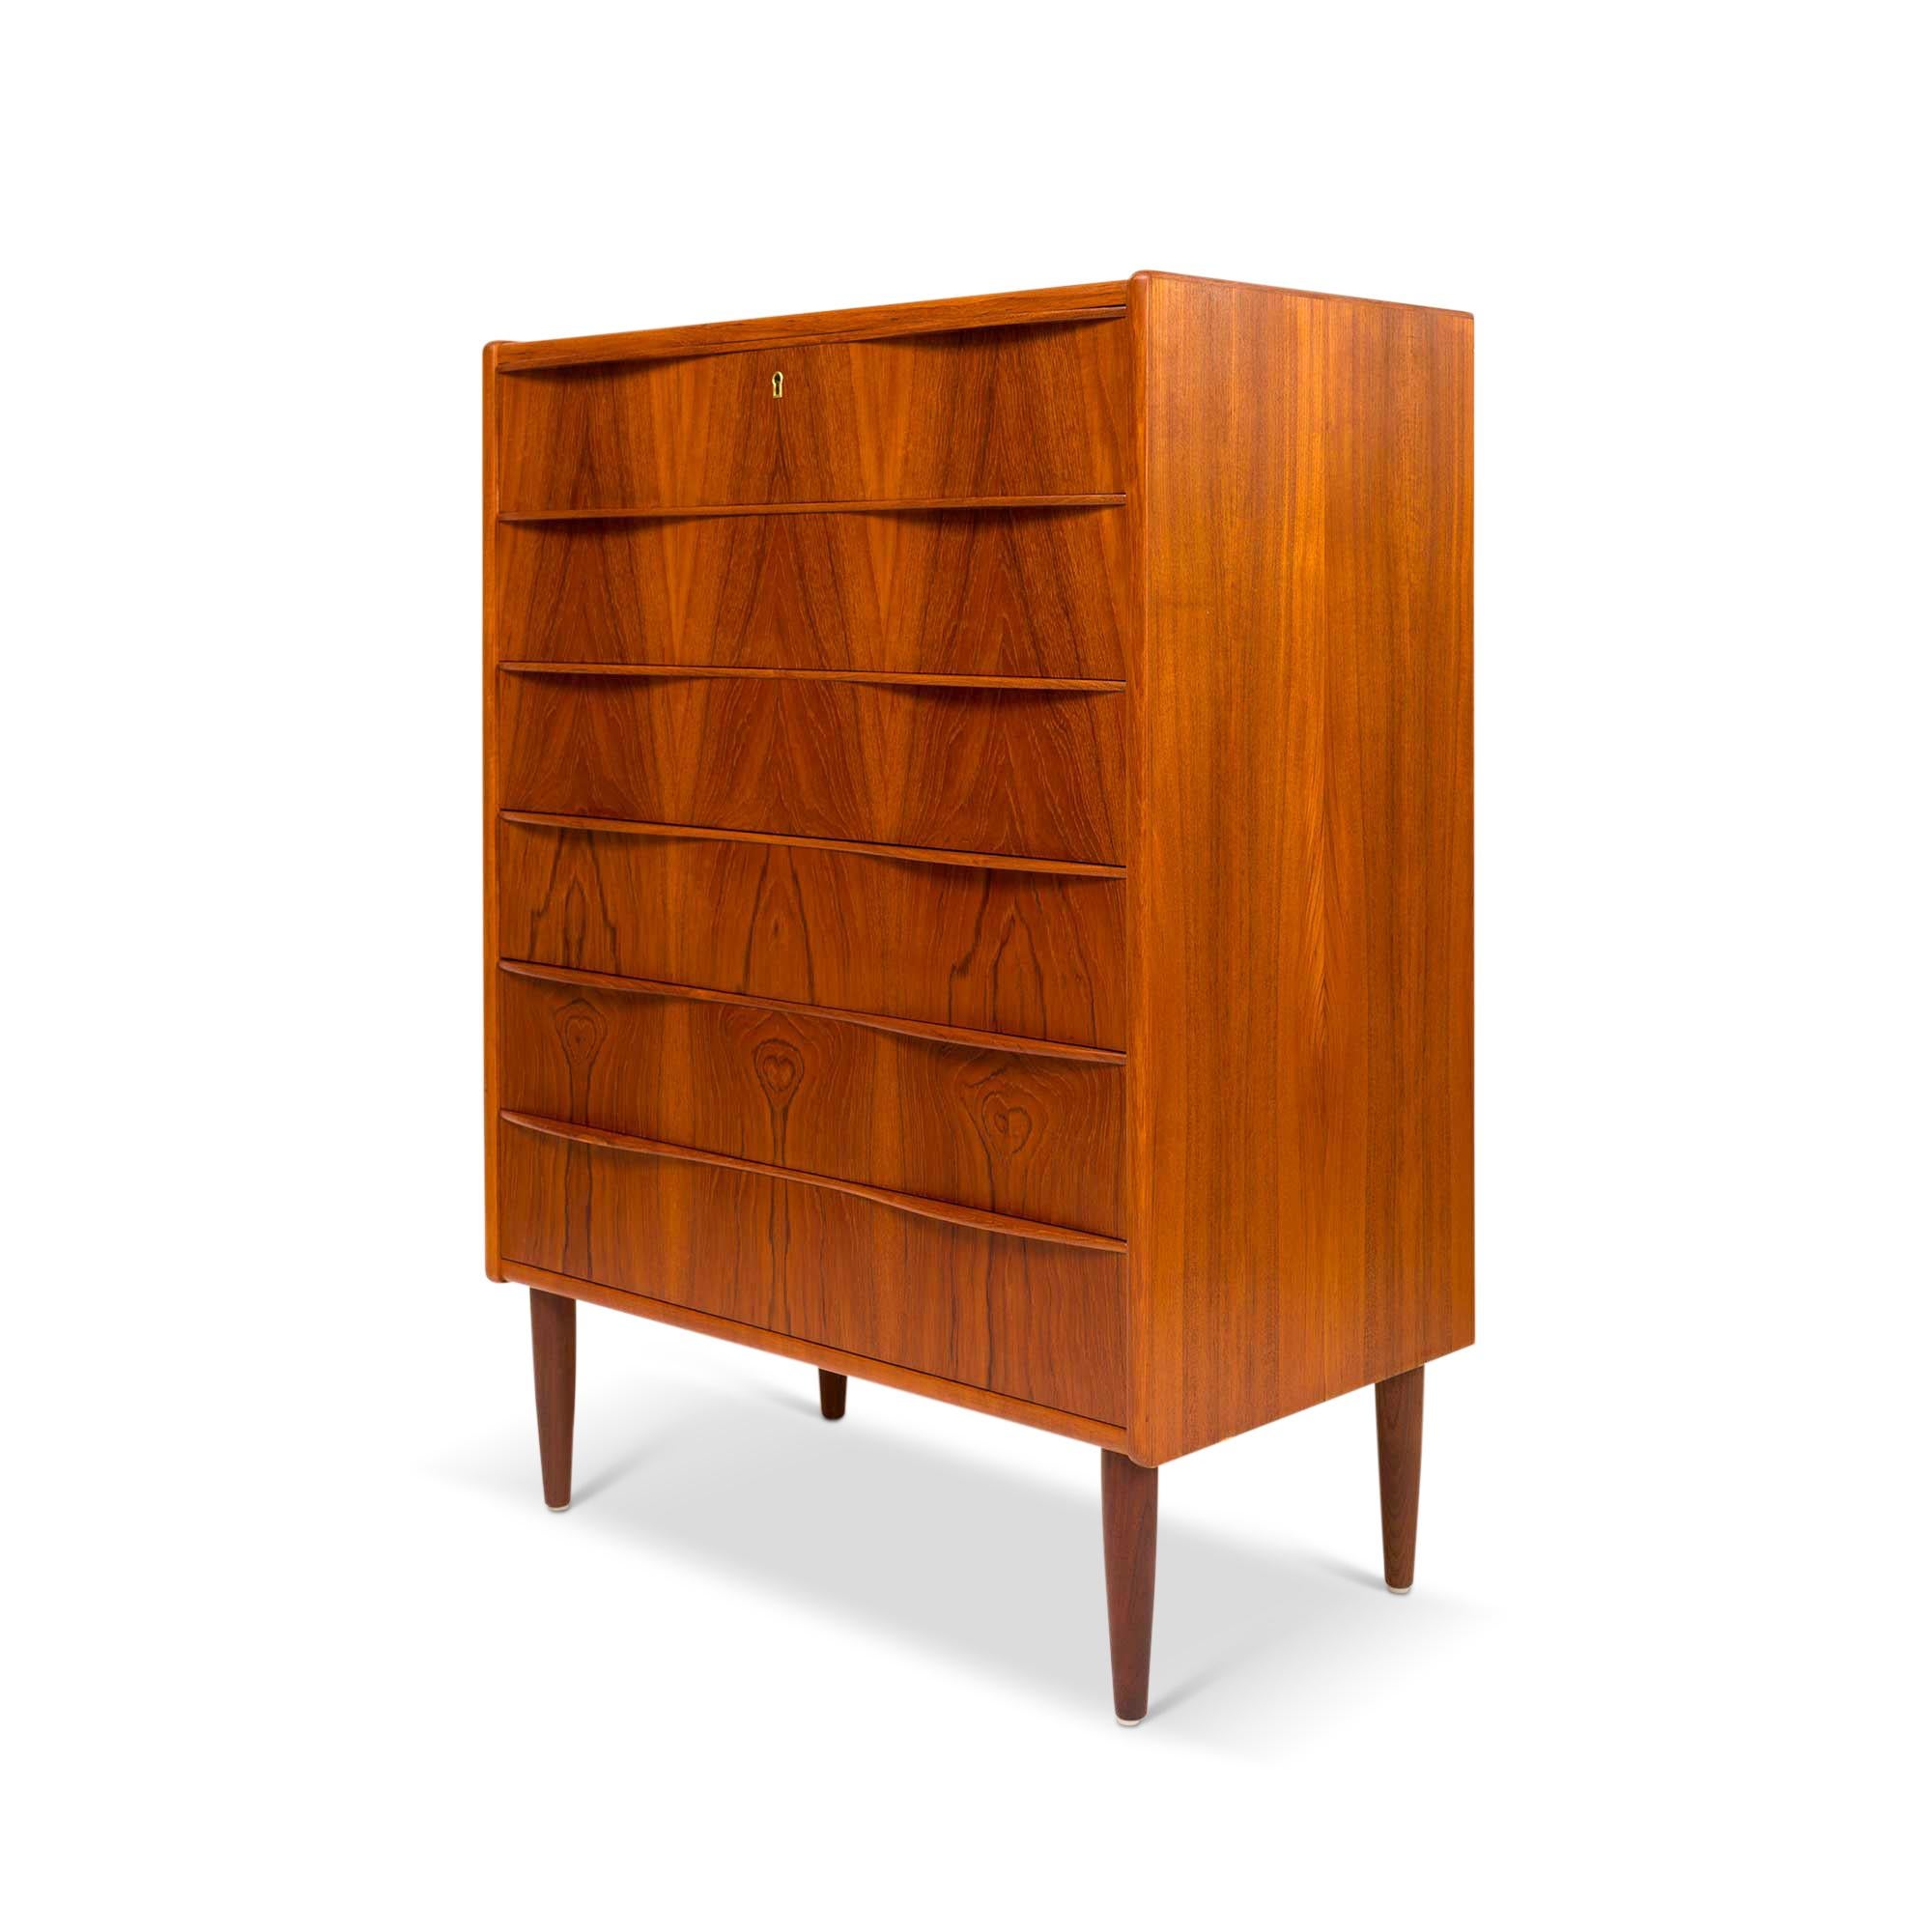 Crafted with meticulous artistry in 1960s Denmark, this stunning modern Danish mid-century Teak Tallboy stands as a testament to unparalleled craftsmanship. Its allure lies in the exquisite teak wood-grain detailing that adorns the tallboy dresser,